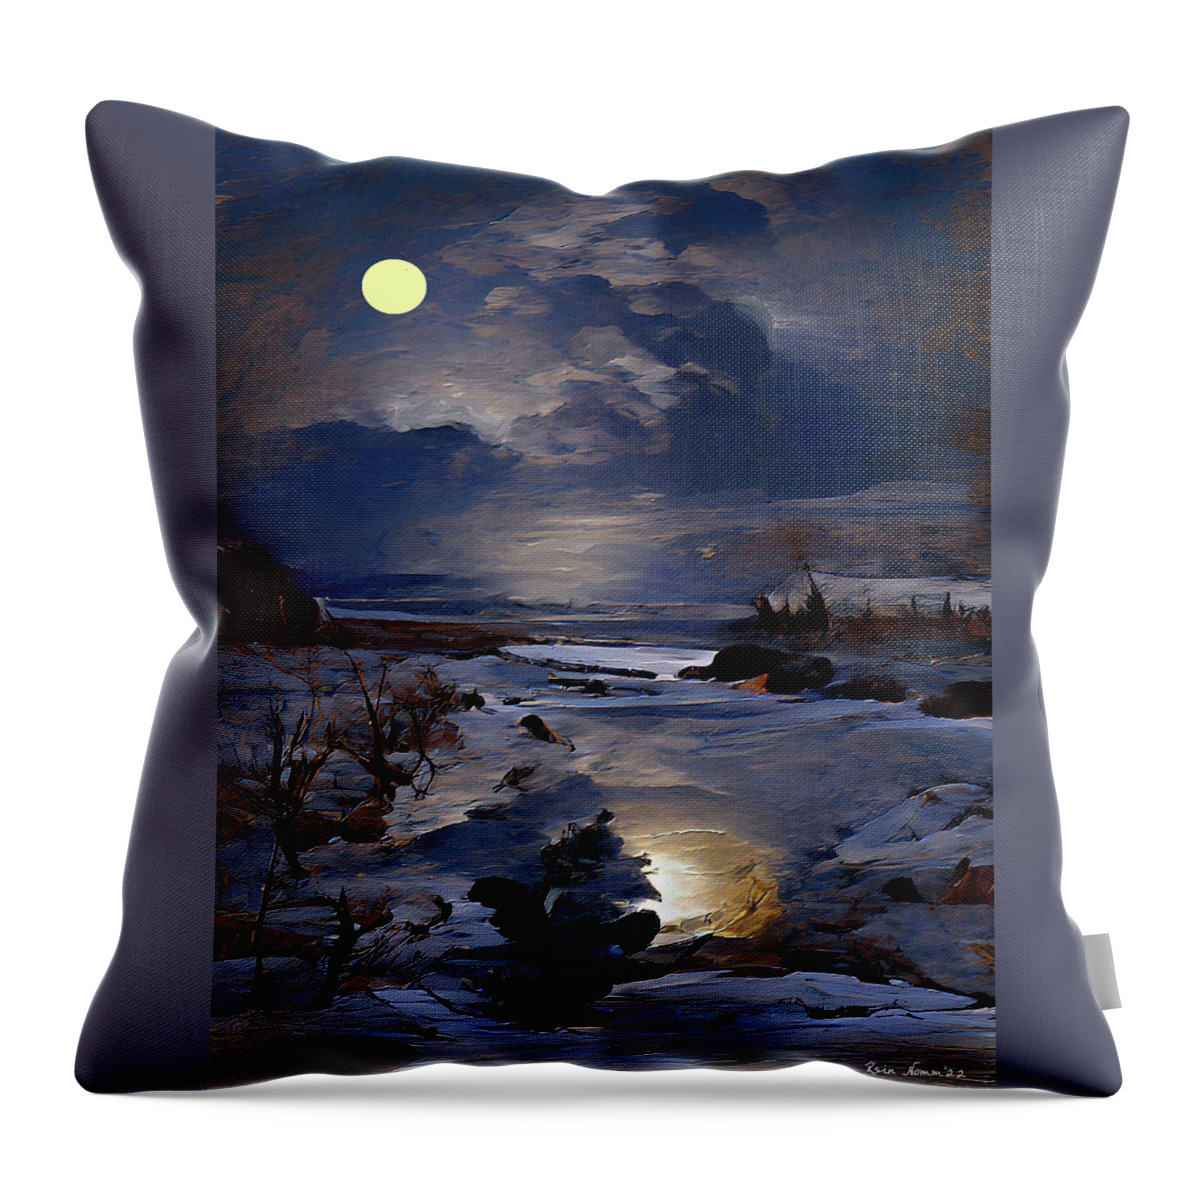  Throw Pillow featuring the digital art Winter Night Reflection by Rein Nomm